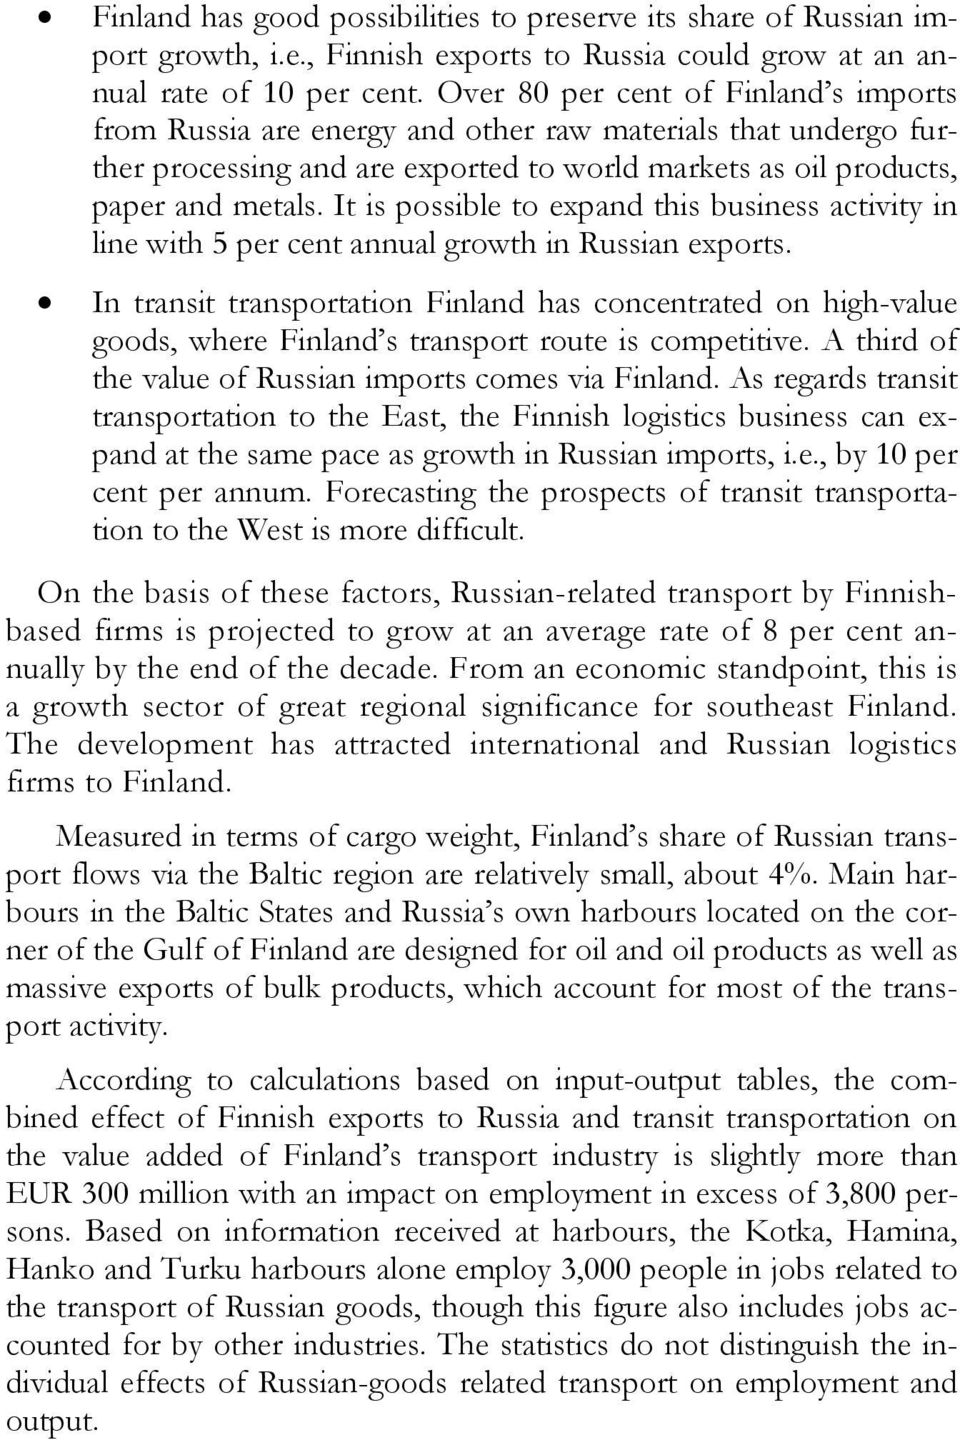 It is possible to expand this business activity in line with 5 per cent annual growth in Russian exports.